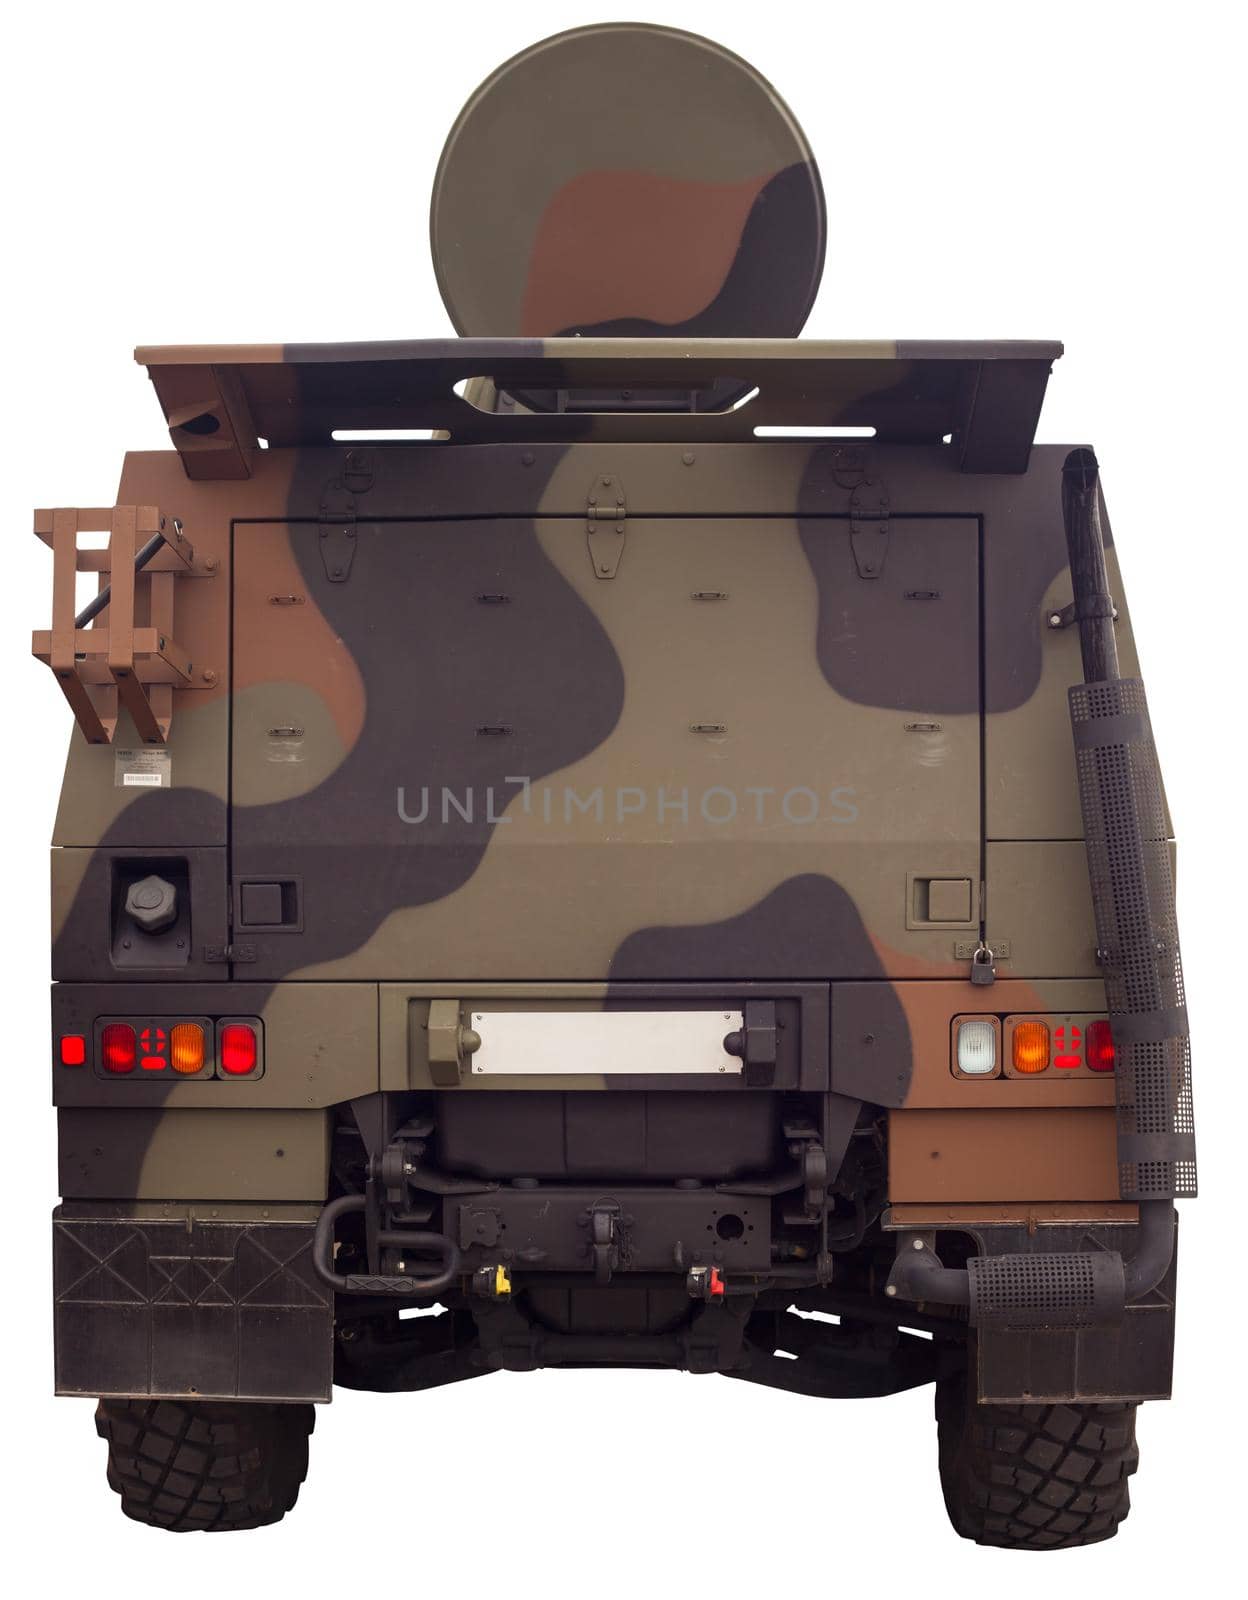 View of Italian army military truckisolated on white background